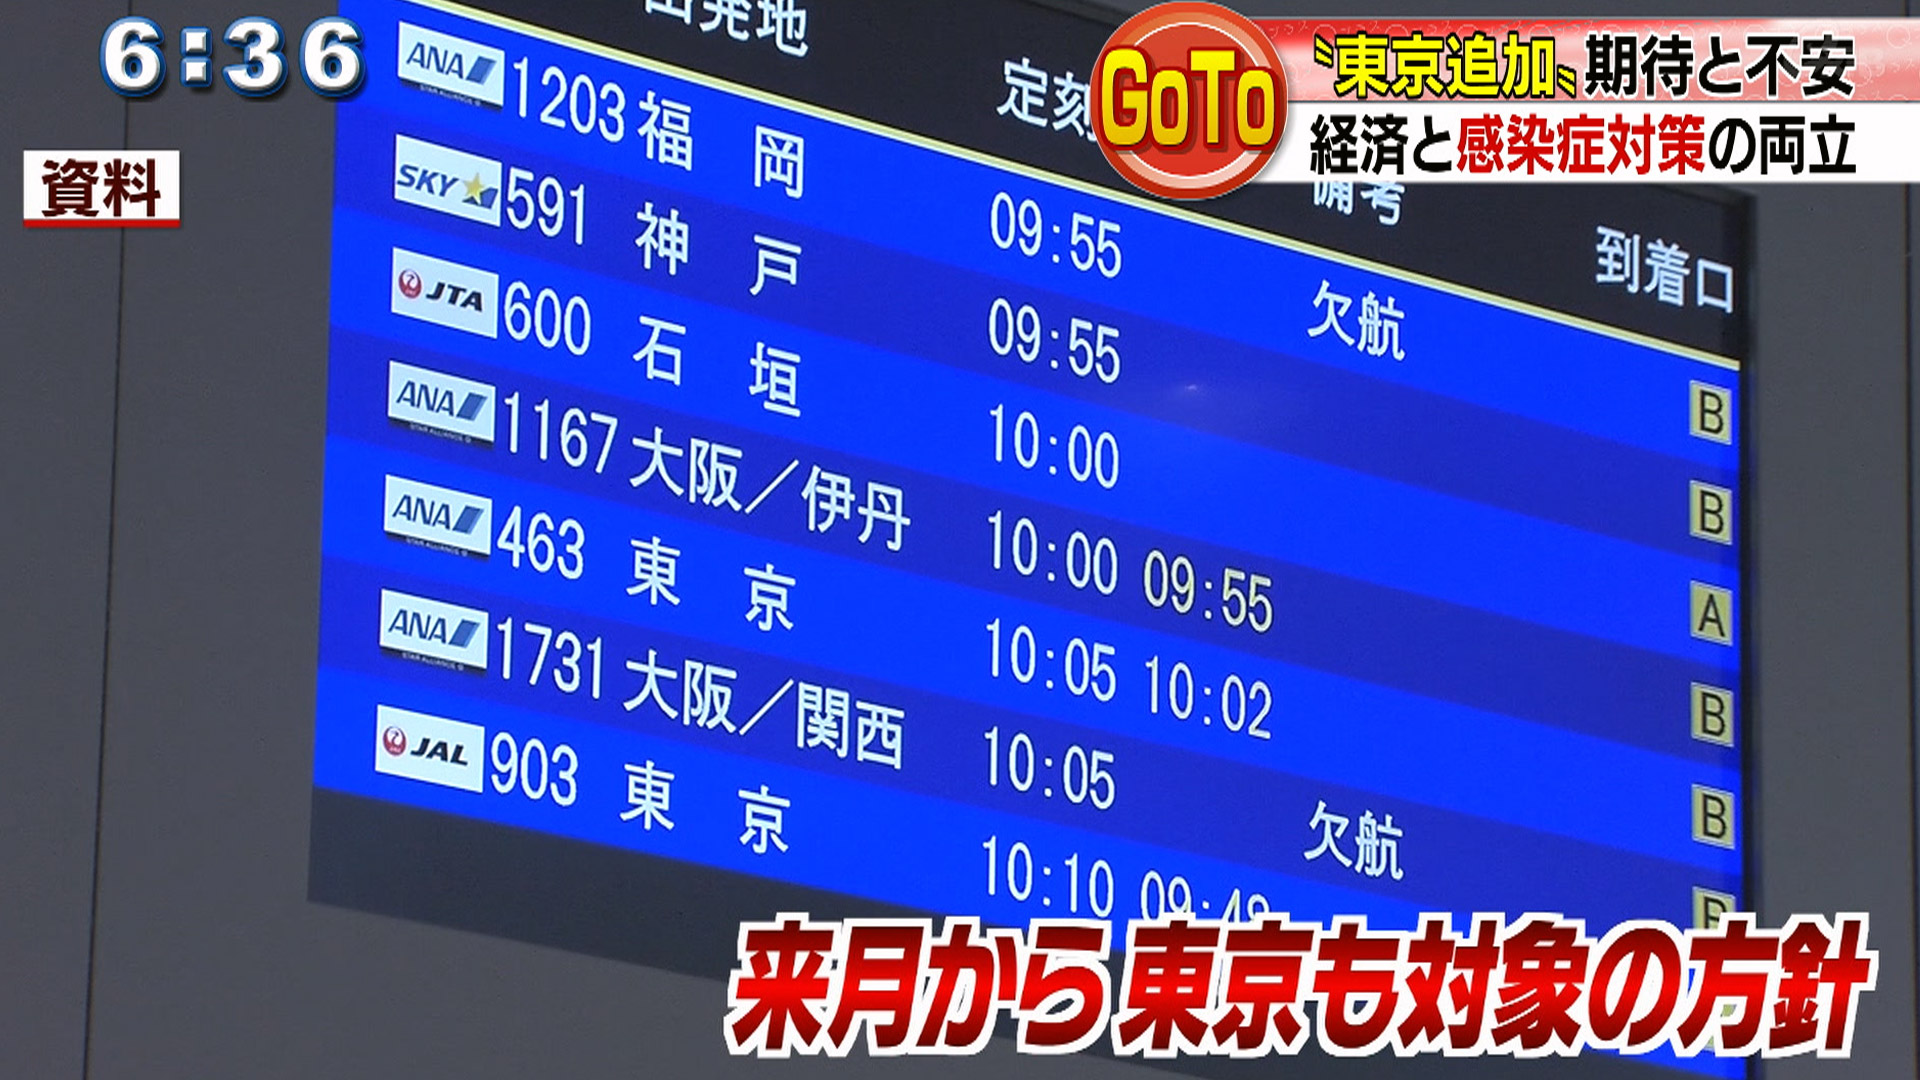 Ｇo To トラベル「東京追加」で期待と不安